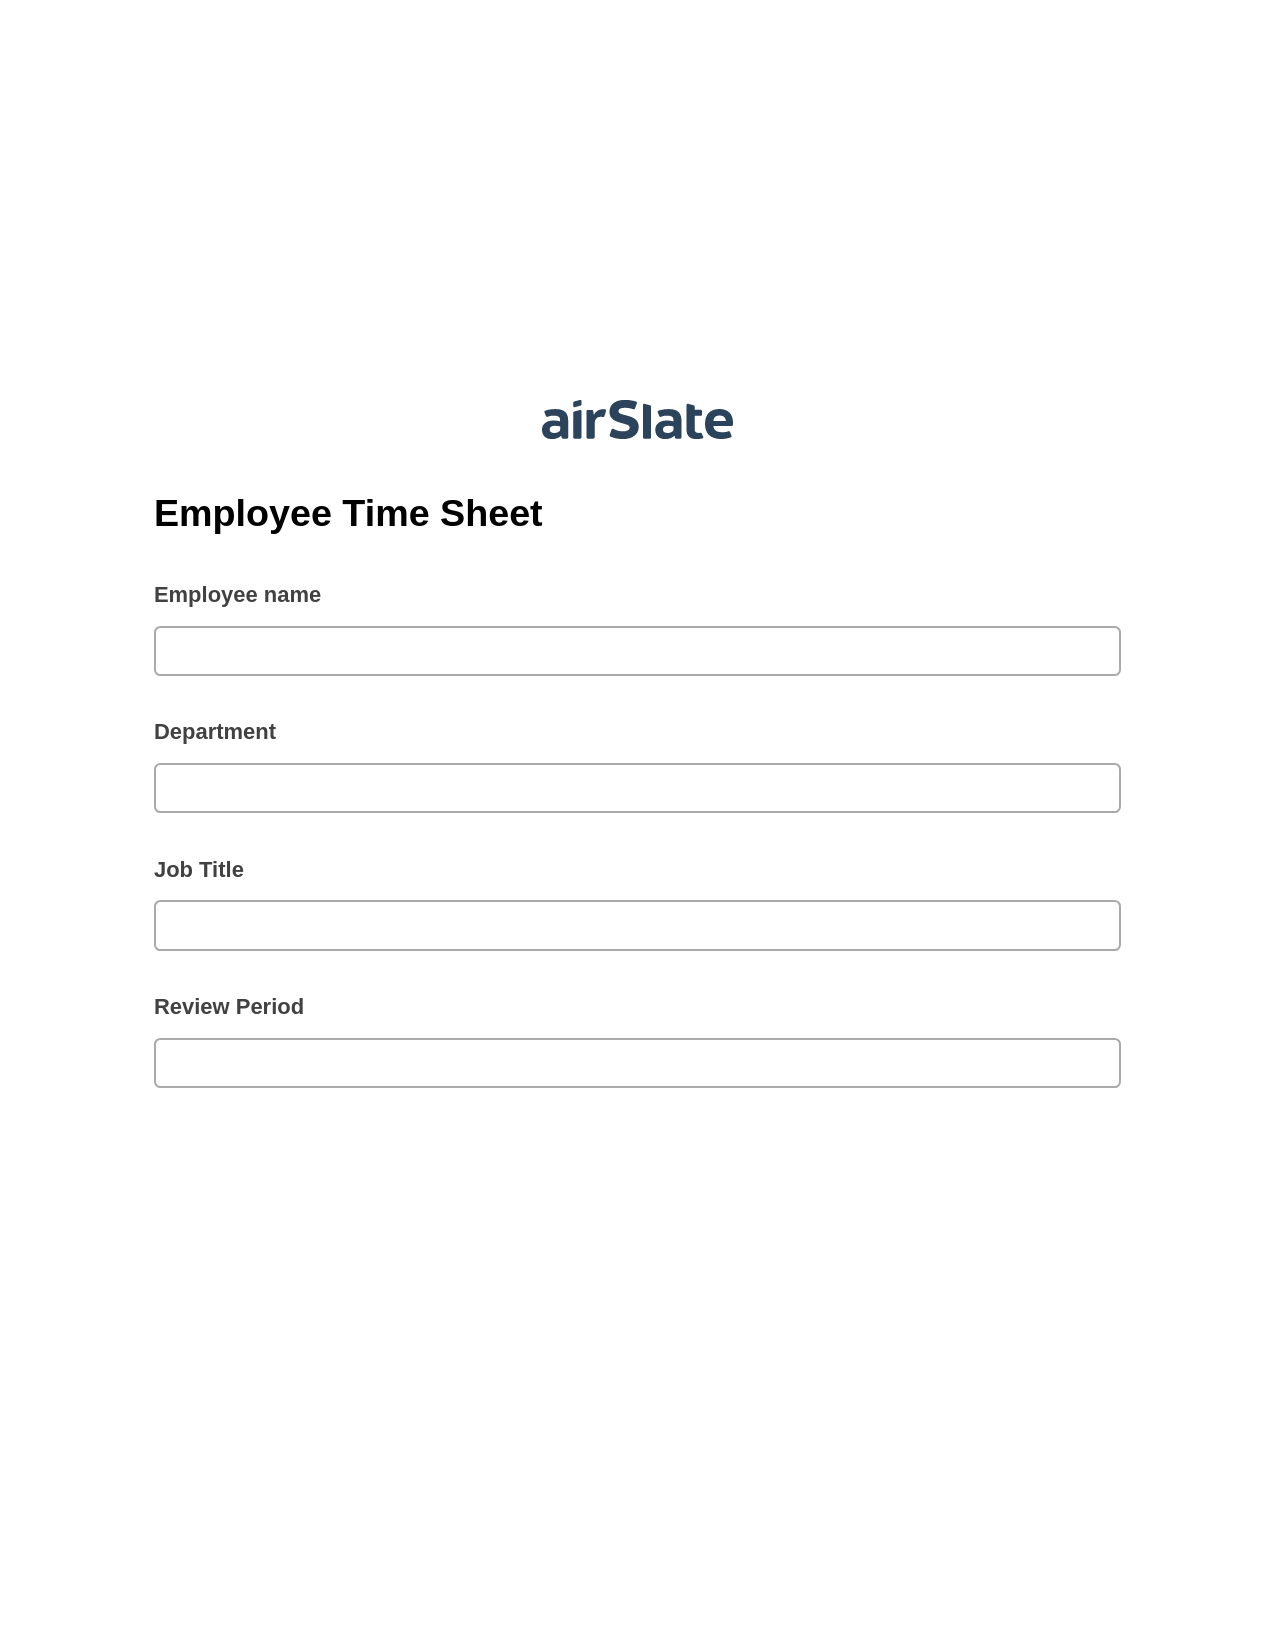 Multirole Employee Time Sheet Pre-fill from Salesforce Records Bot, Create Salesforce Records Bot, Archive to Dropbox Bot